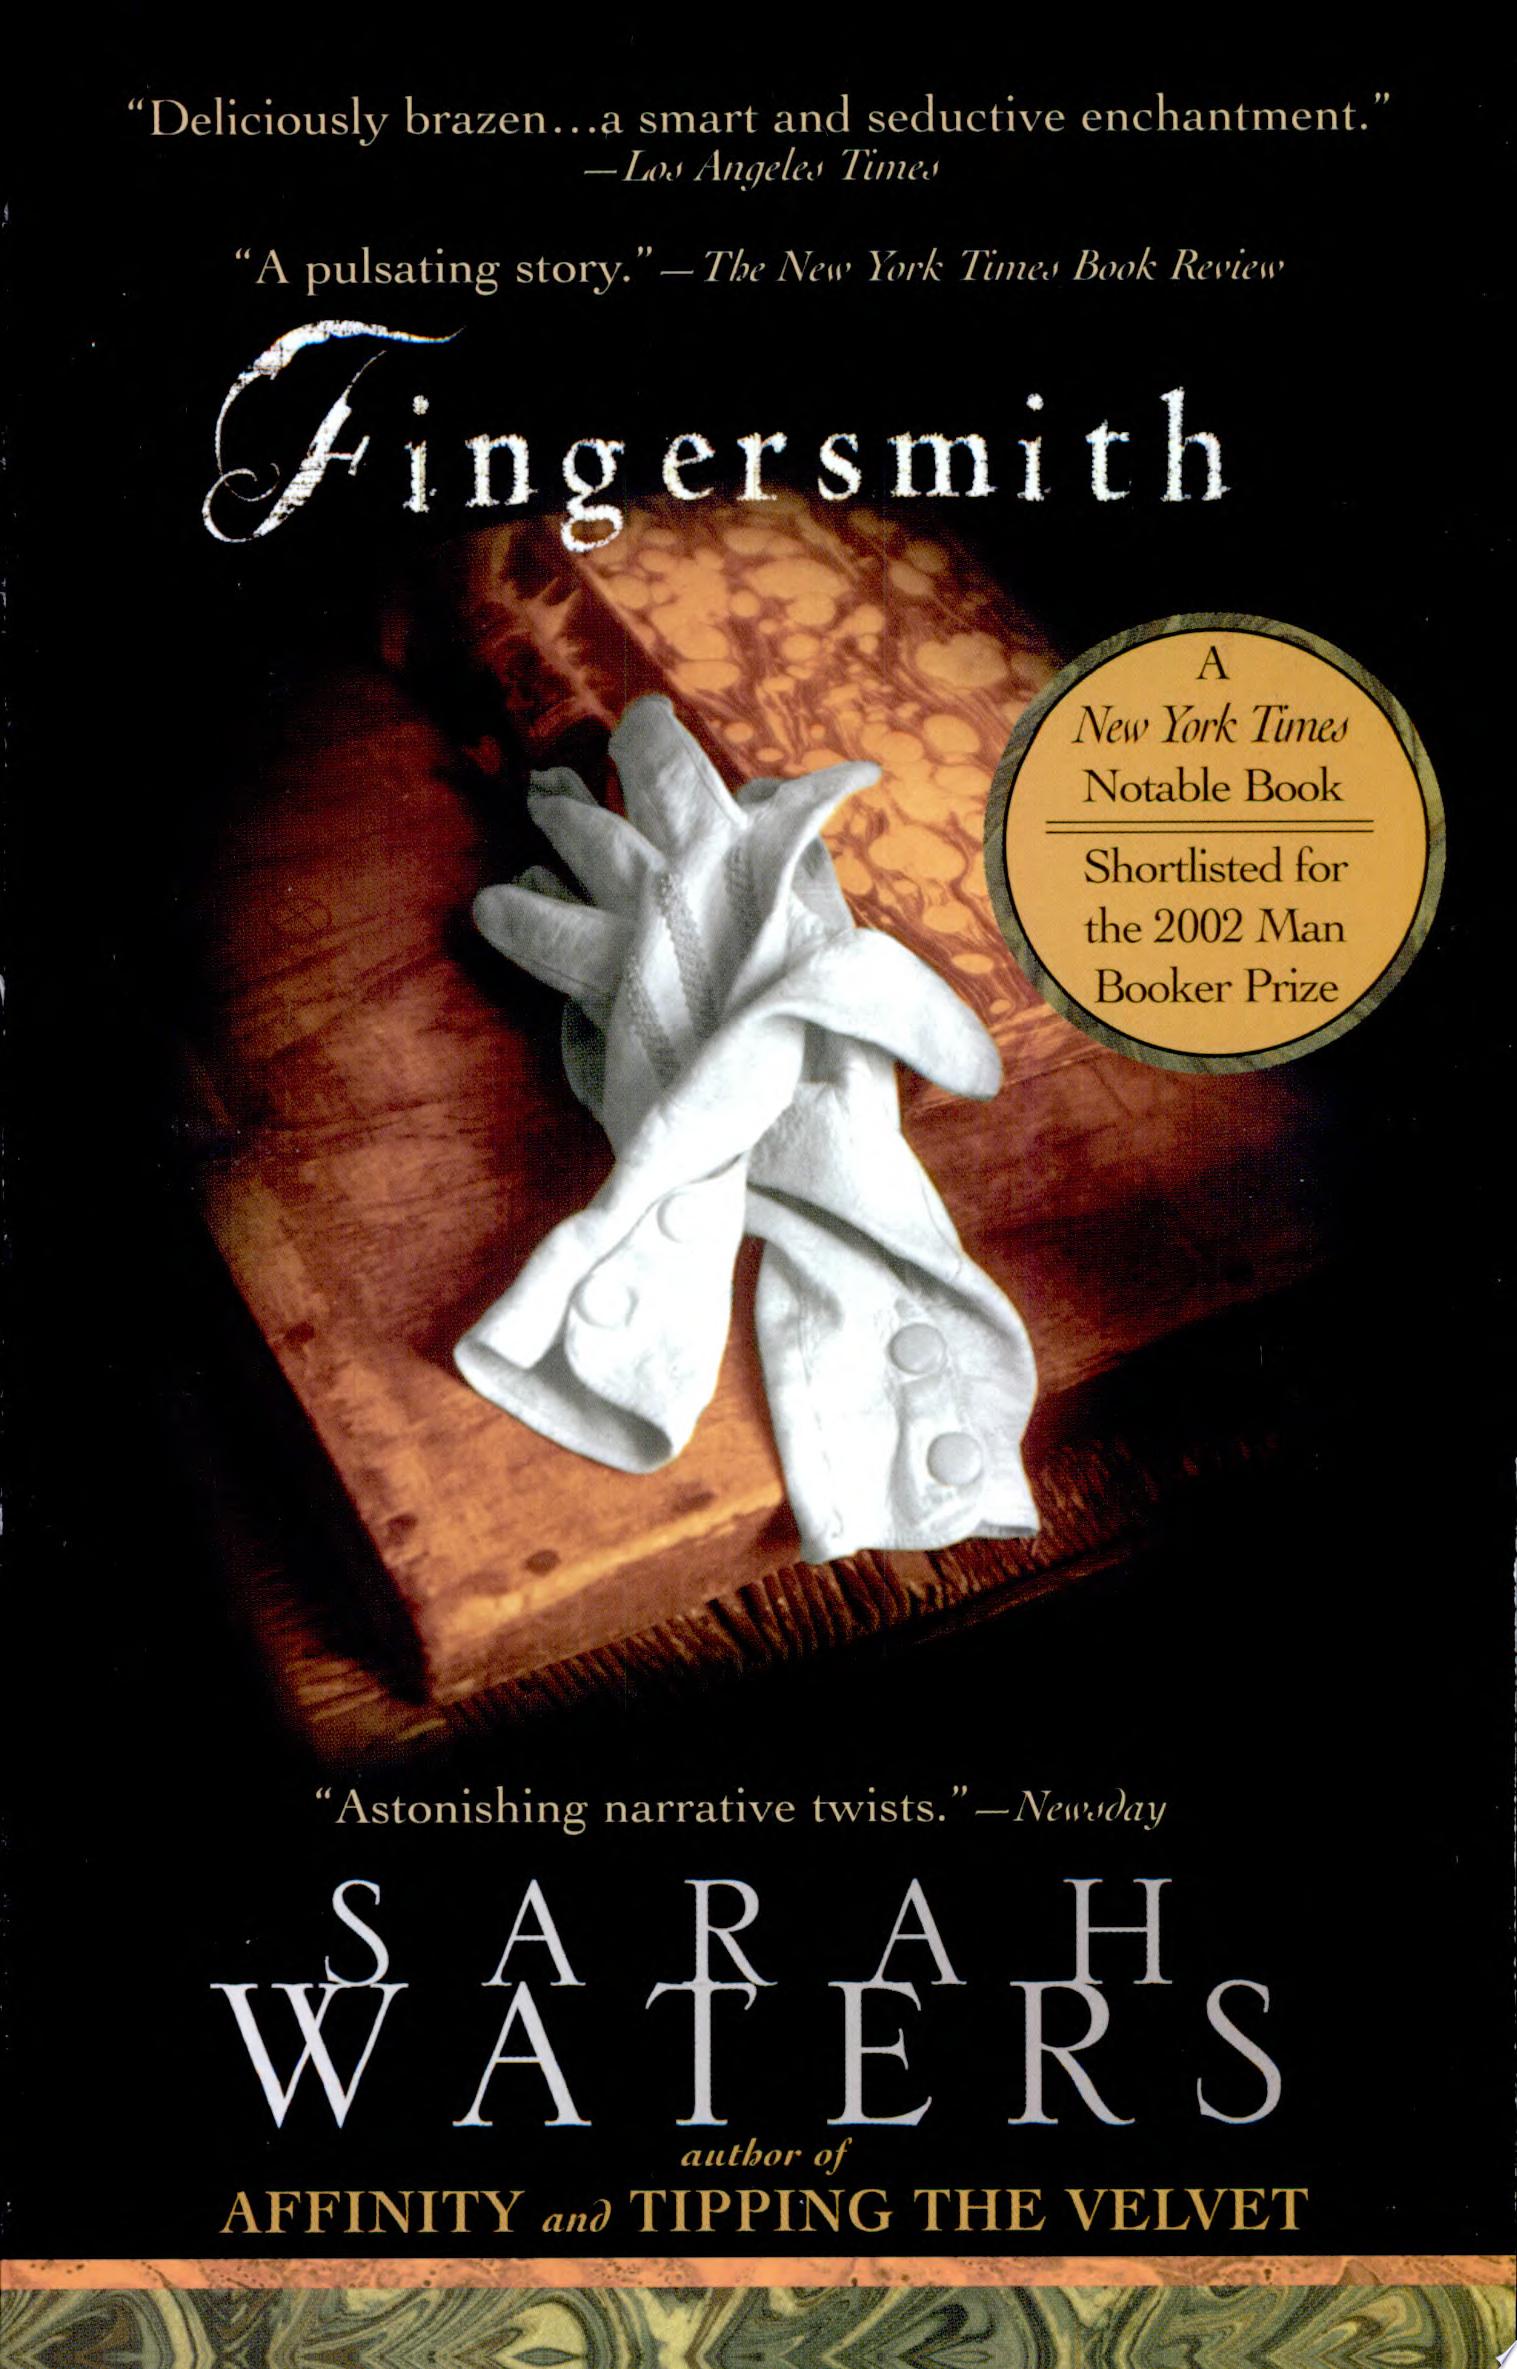 Image for "Fingersmith"